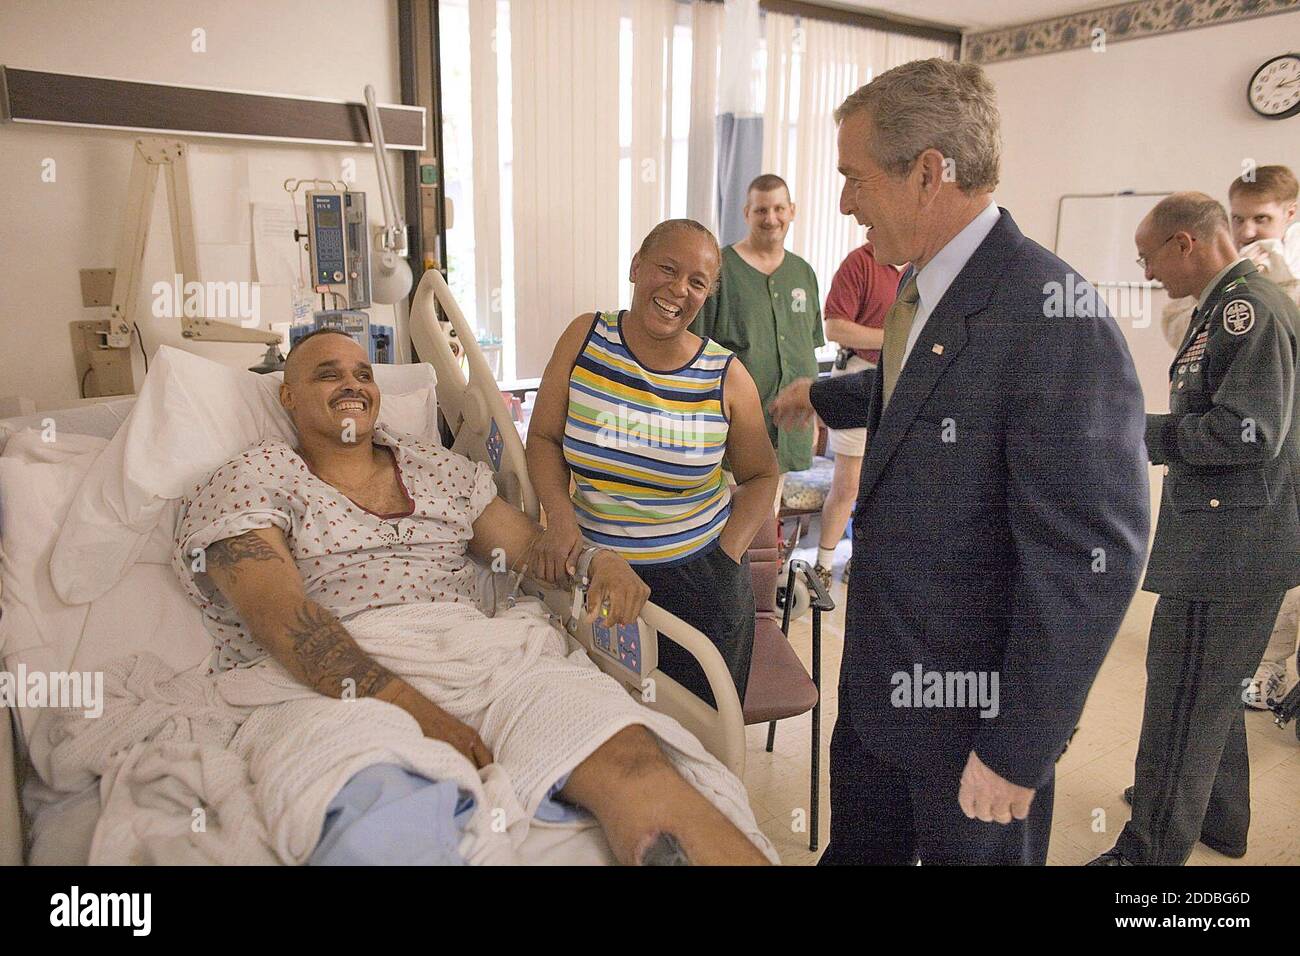 NO FILM, NO VIDEO, NO TV, NO DOCUMENTARY - President George W. Bush visits with Sgt. John Iverson and his wife, Pamela, during the president's visit to Walter Reed Army Medical Center on Friday, July 1, 2005. The soldier, from Long Beach, California, is recovering from injuries sustained while serving in Iraq. Photo by Eric Draper/White House/KRT/ABACAPRESS.COM Stock Photo